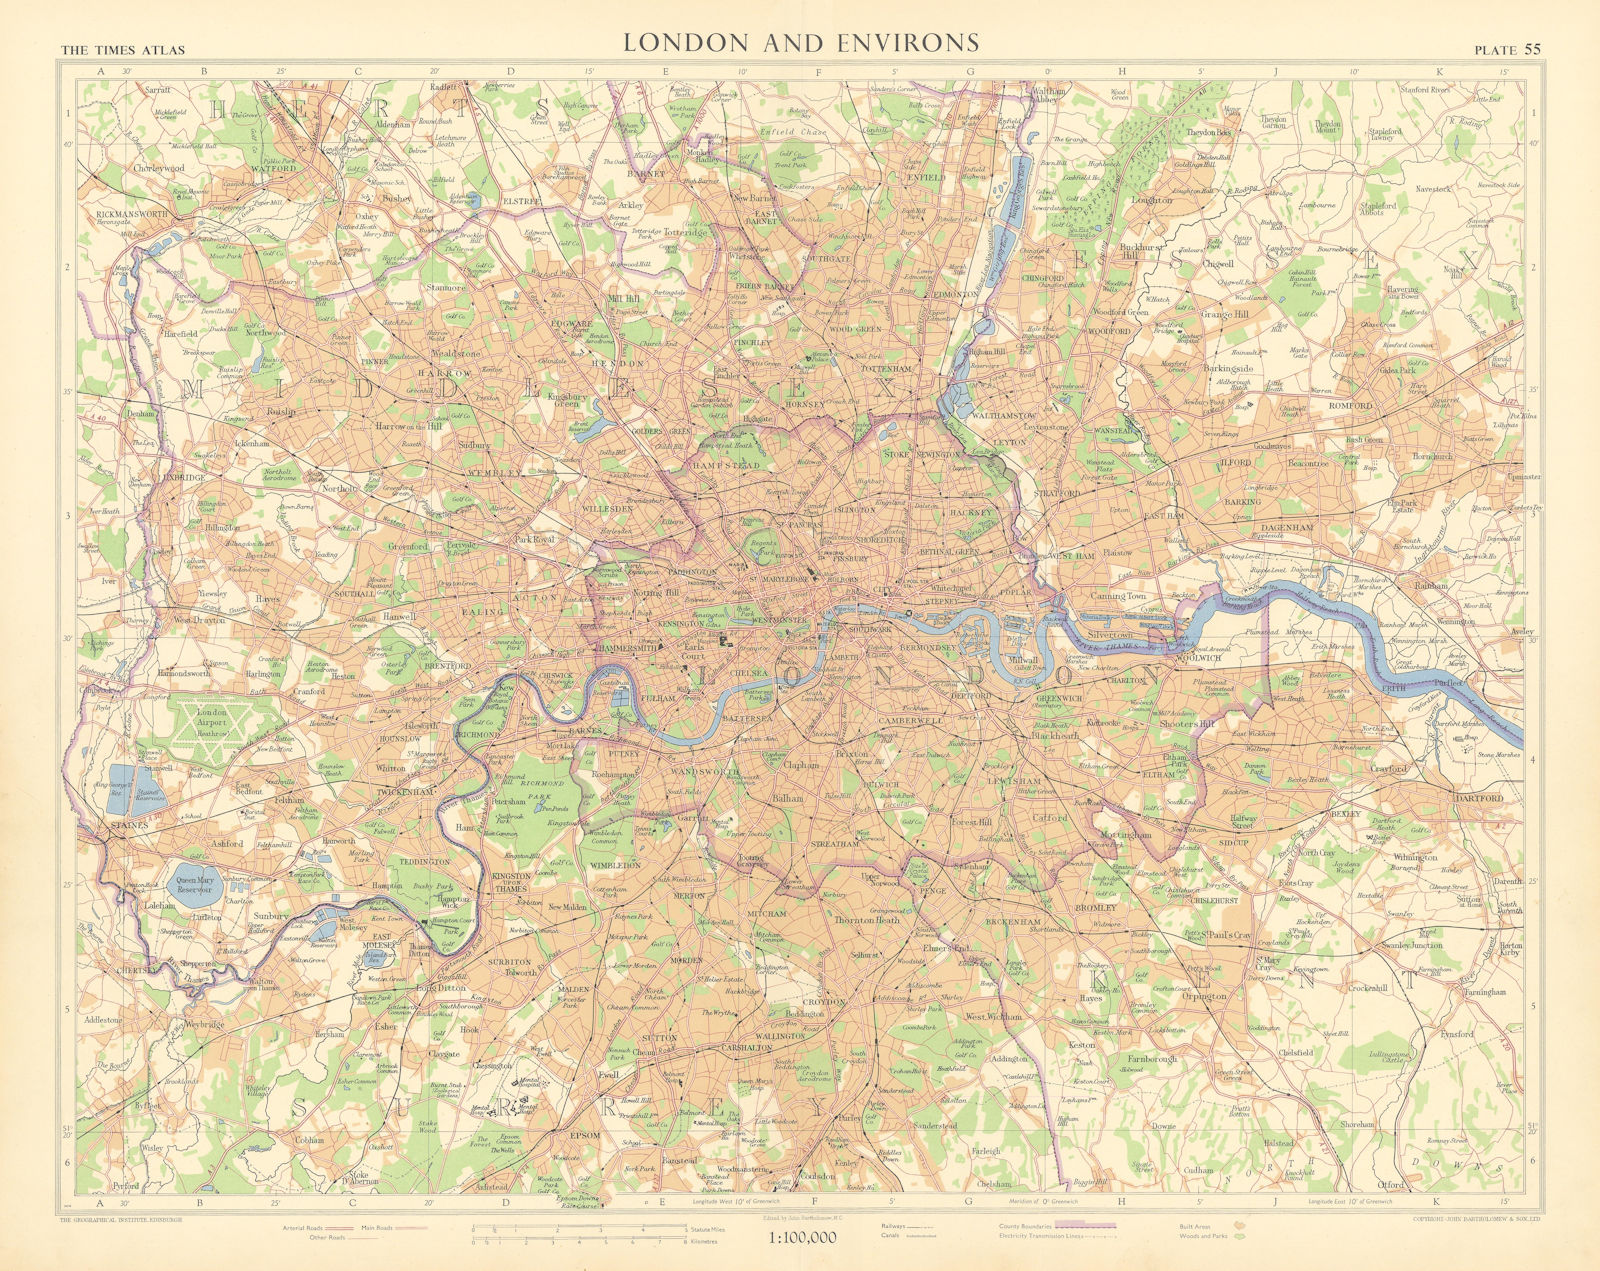 Greater London. Railways canals electricity transmission lines. TIMES 1955 map